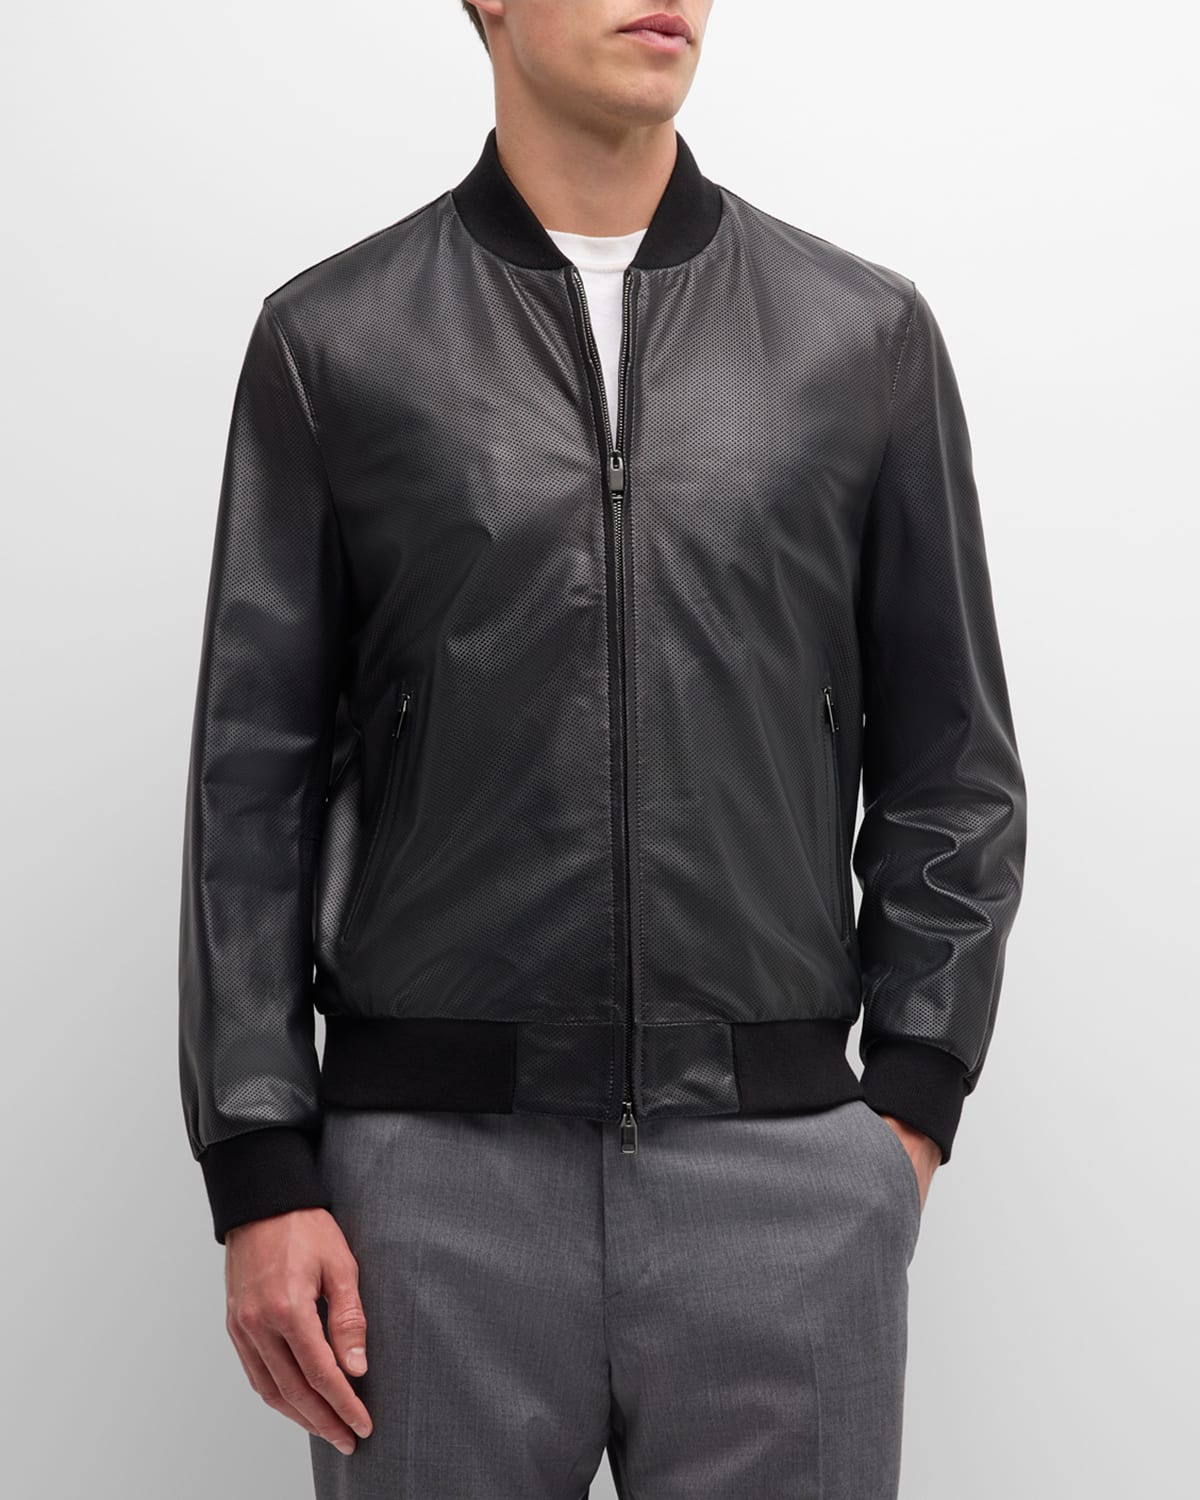 Men's Perforated Leather Bomber Jacket